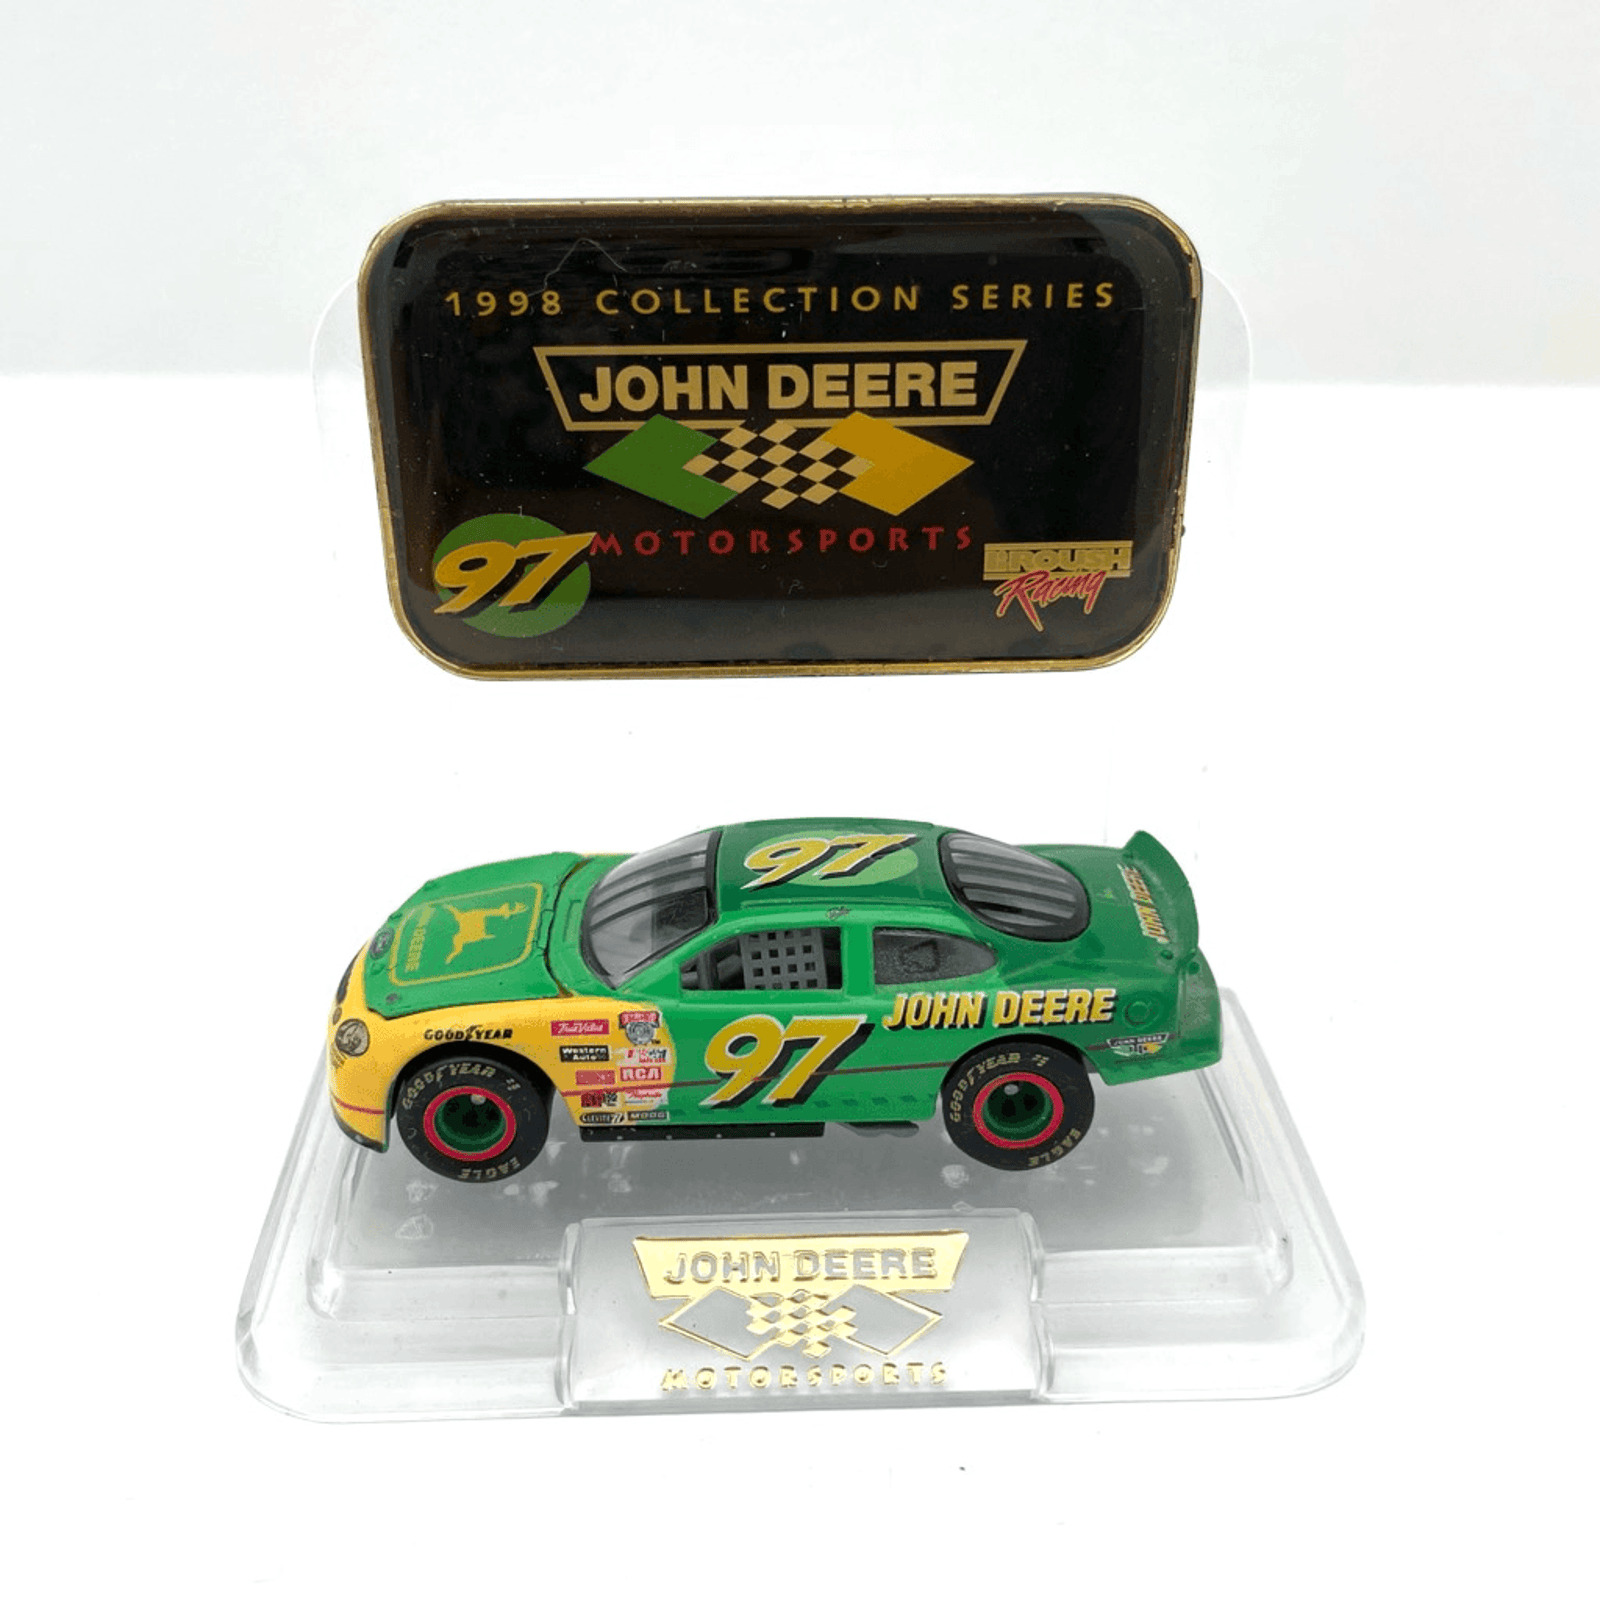 John Deere Vintage Nascar Chad Little #97 Die Cast Race Car with Stand 1/64